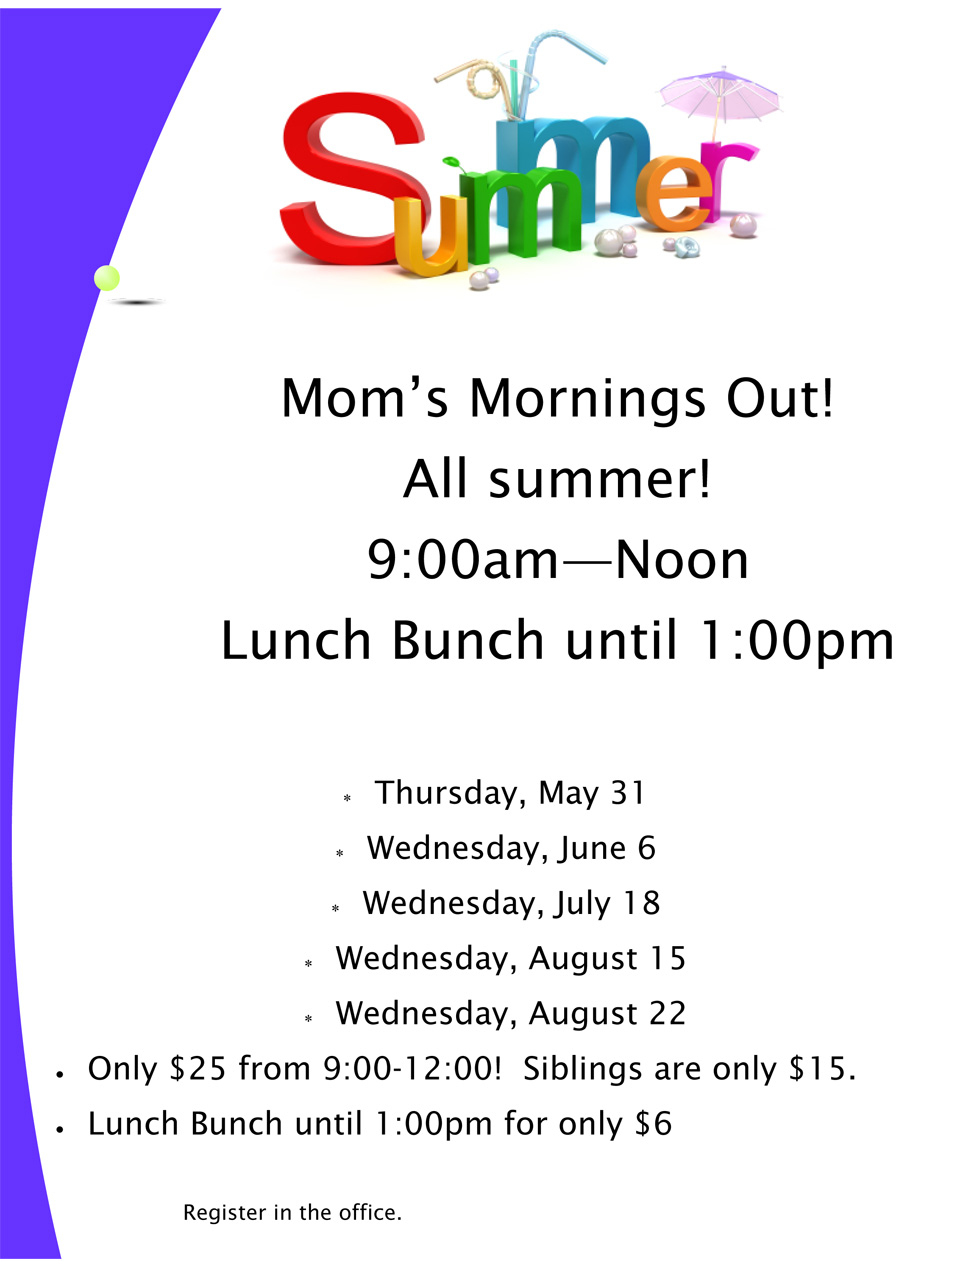 Mom's Morning Out at Aldersgate Weekday School - Summer 2018